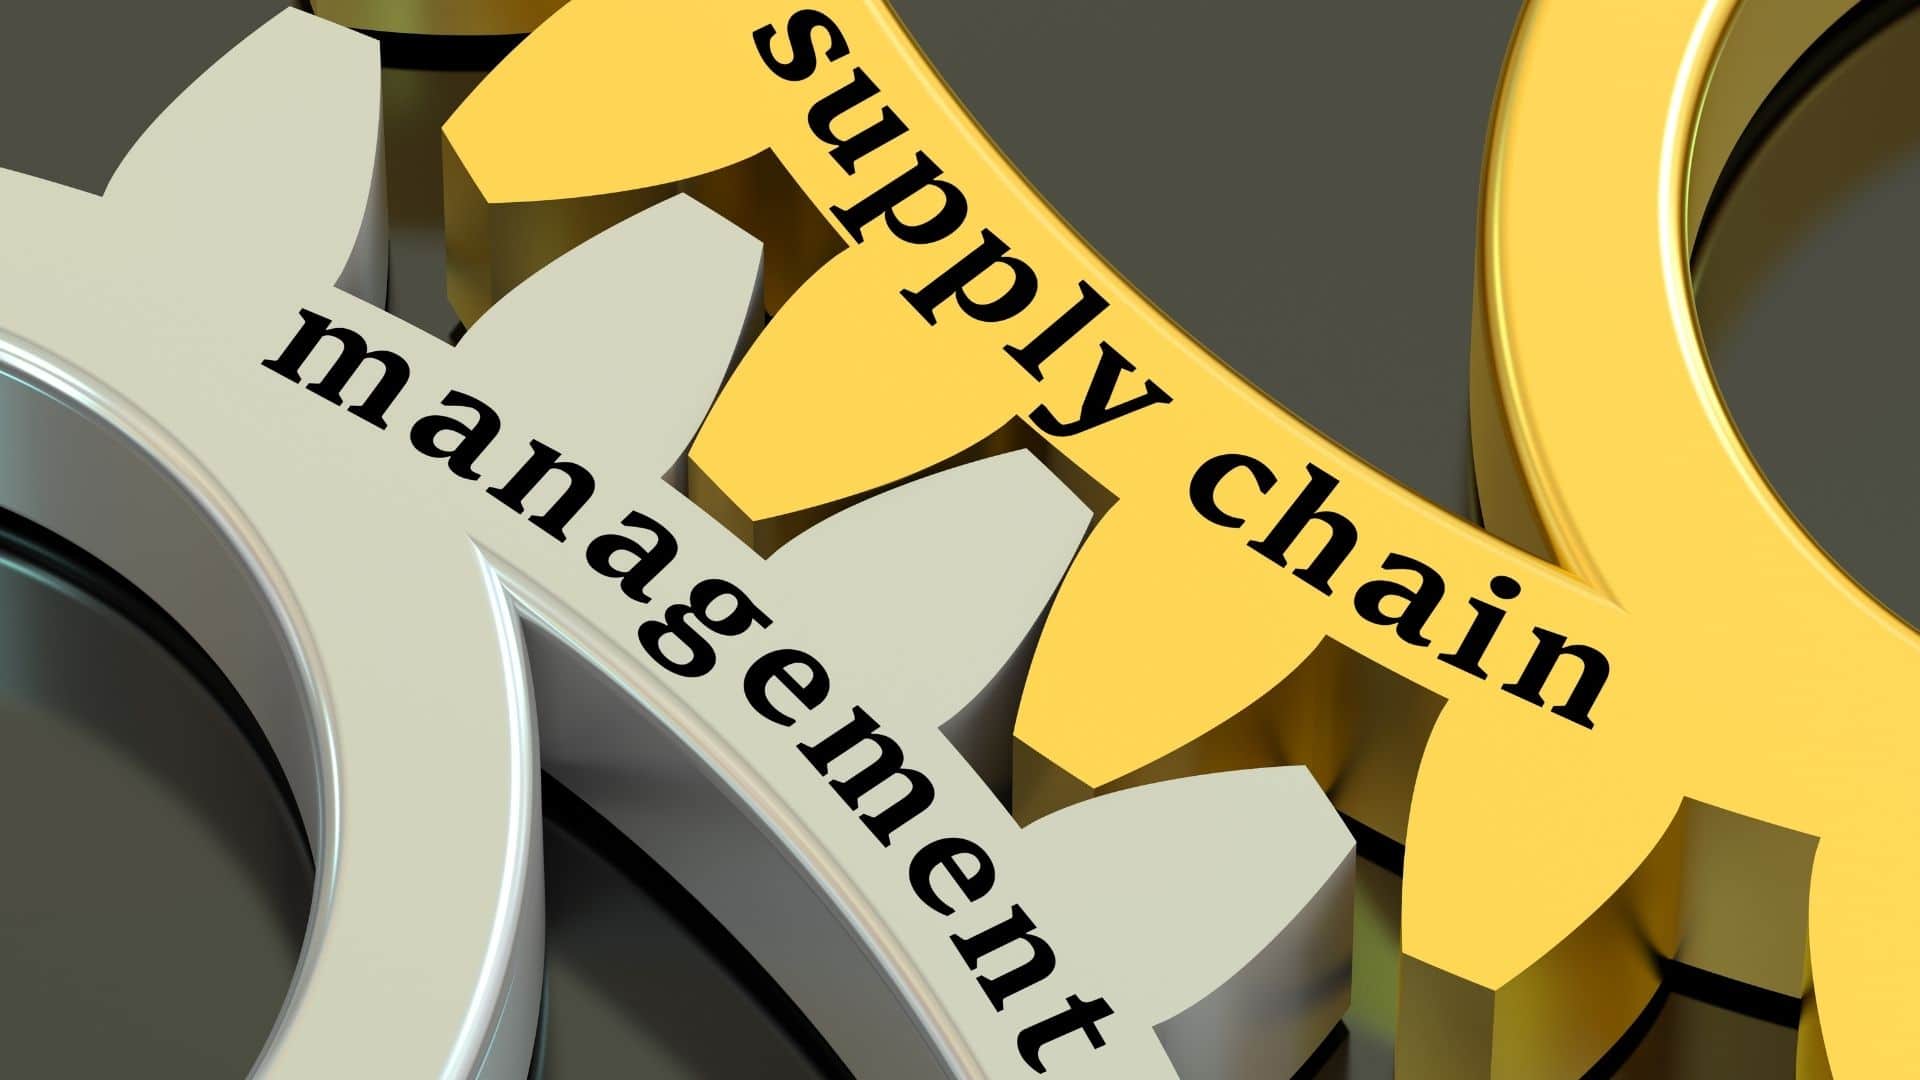 suply chain(https://www.oracle.com/sg/scm/what-is-supply-chain-management/)